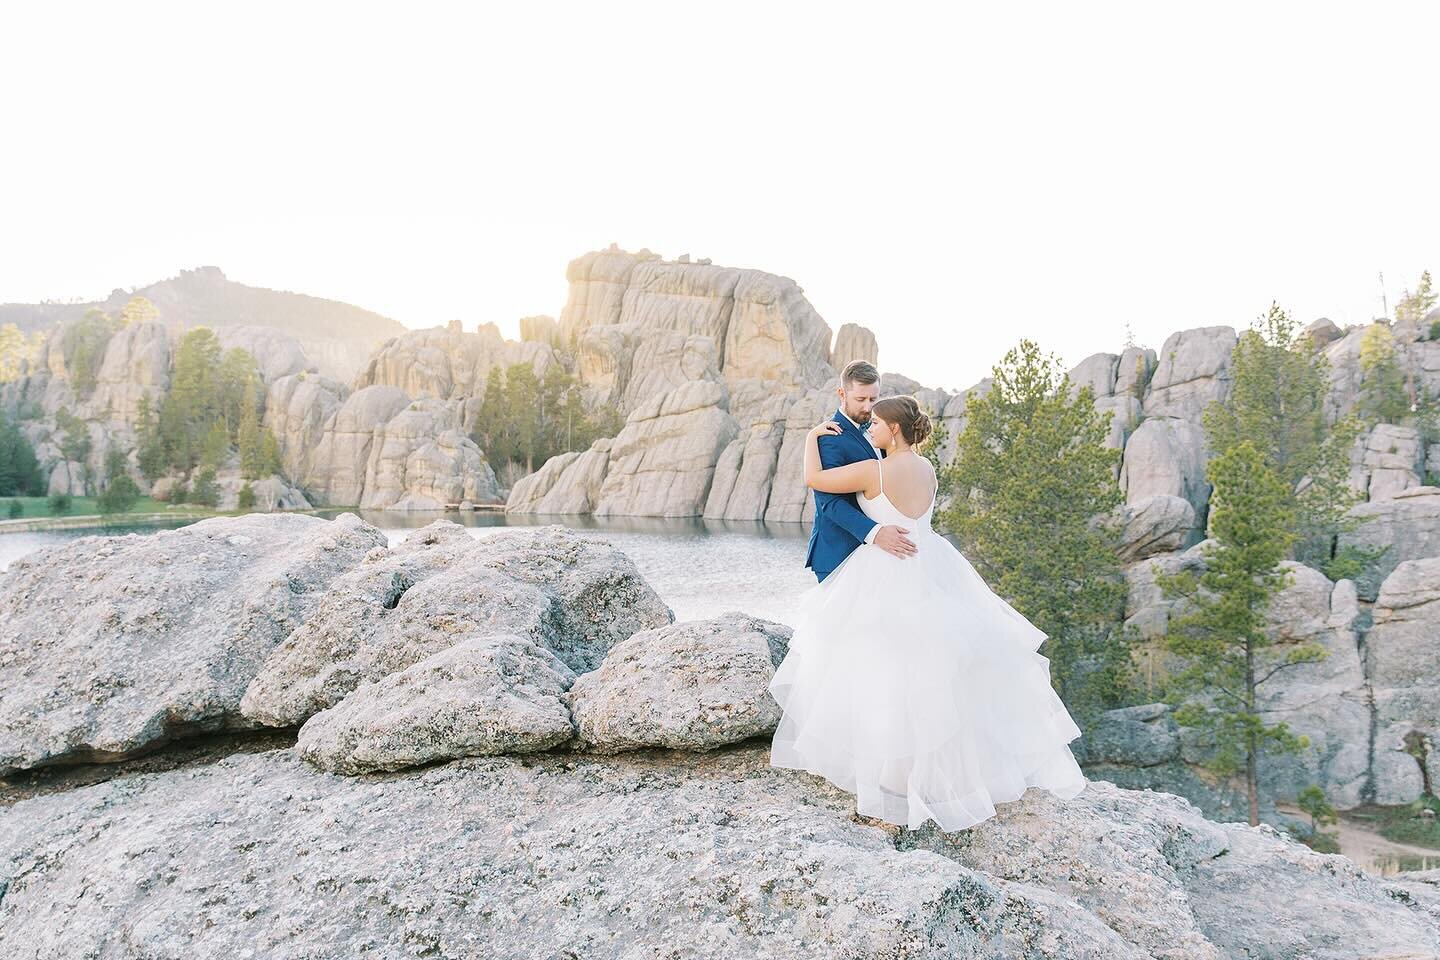 Golden hour in the beautiful Black Hills with K &amp; D at Sylvan Lake. One of my favorite places! ✨

#blackhillswedding #blackhillssd #goldenhour #goldenhourmagic #sylvanlake #lakewedding #blackhillsphotographer #sylvanlakesd #custerstatepark #adven